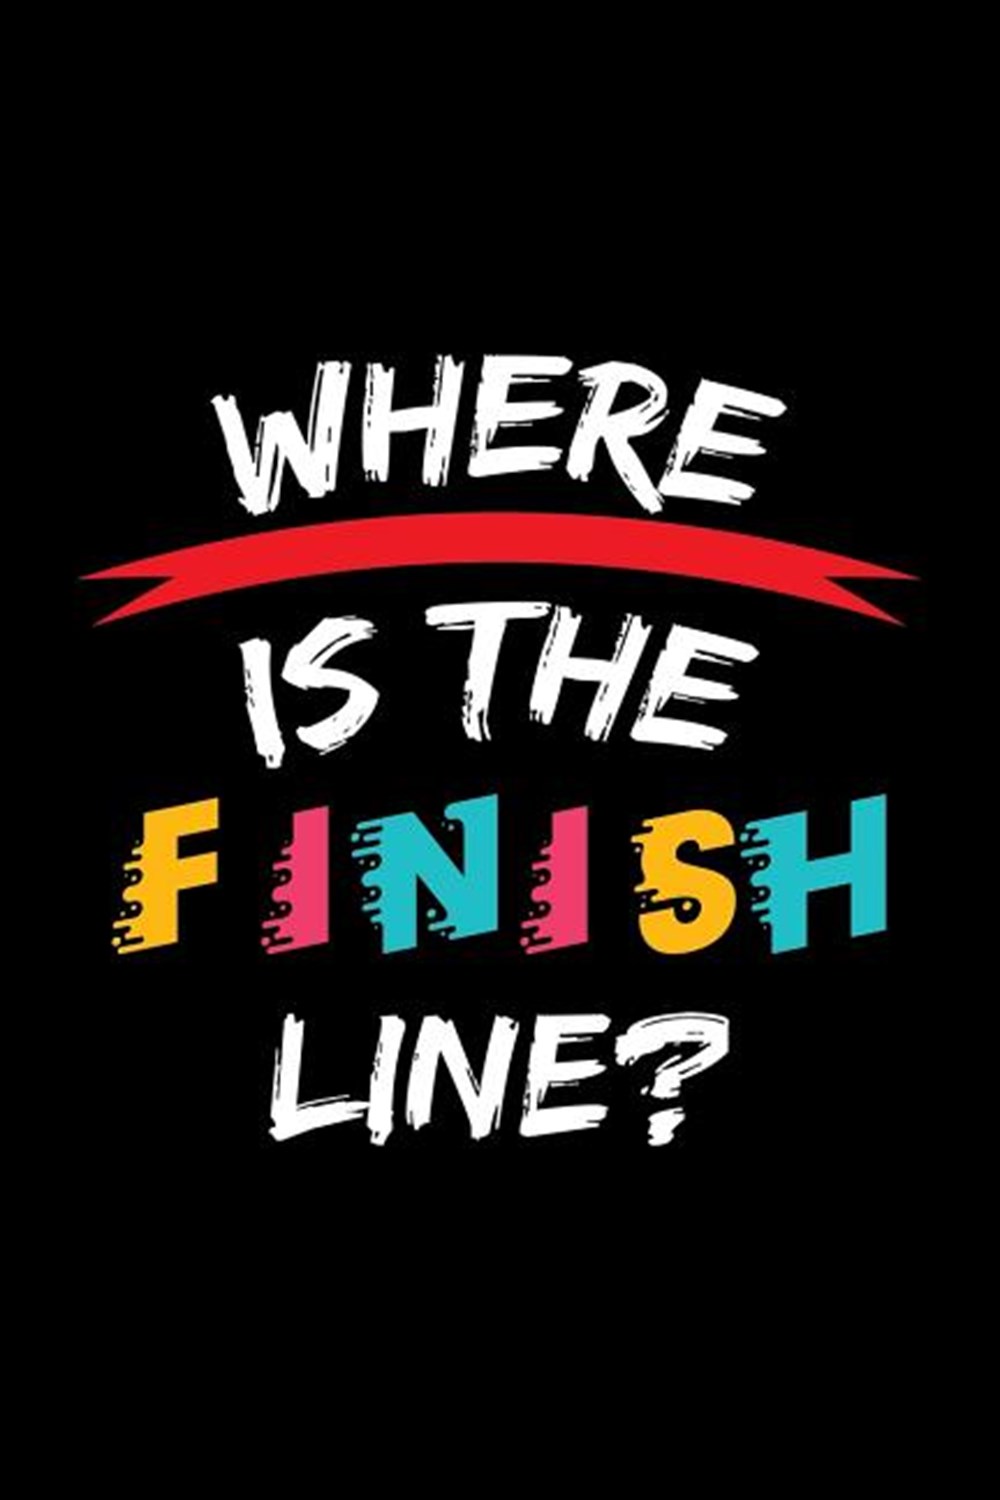 Where Is The Finish Line? Blank Paper Sketch Book - Artist Sketch Pad Journal for Sketching, Doodlin